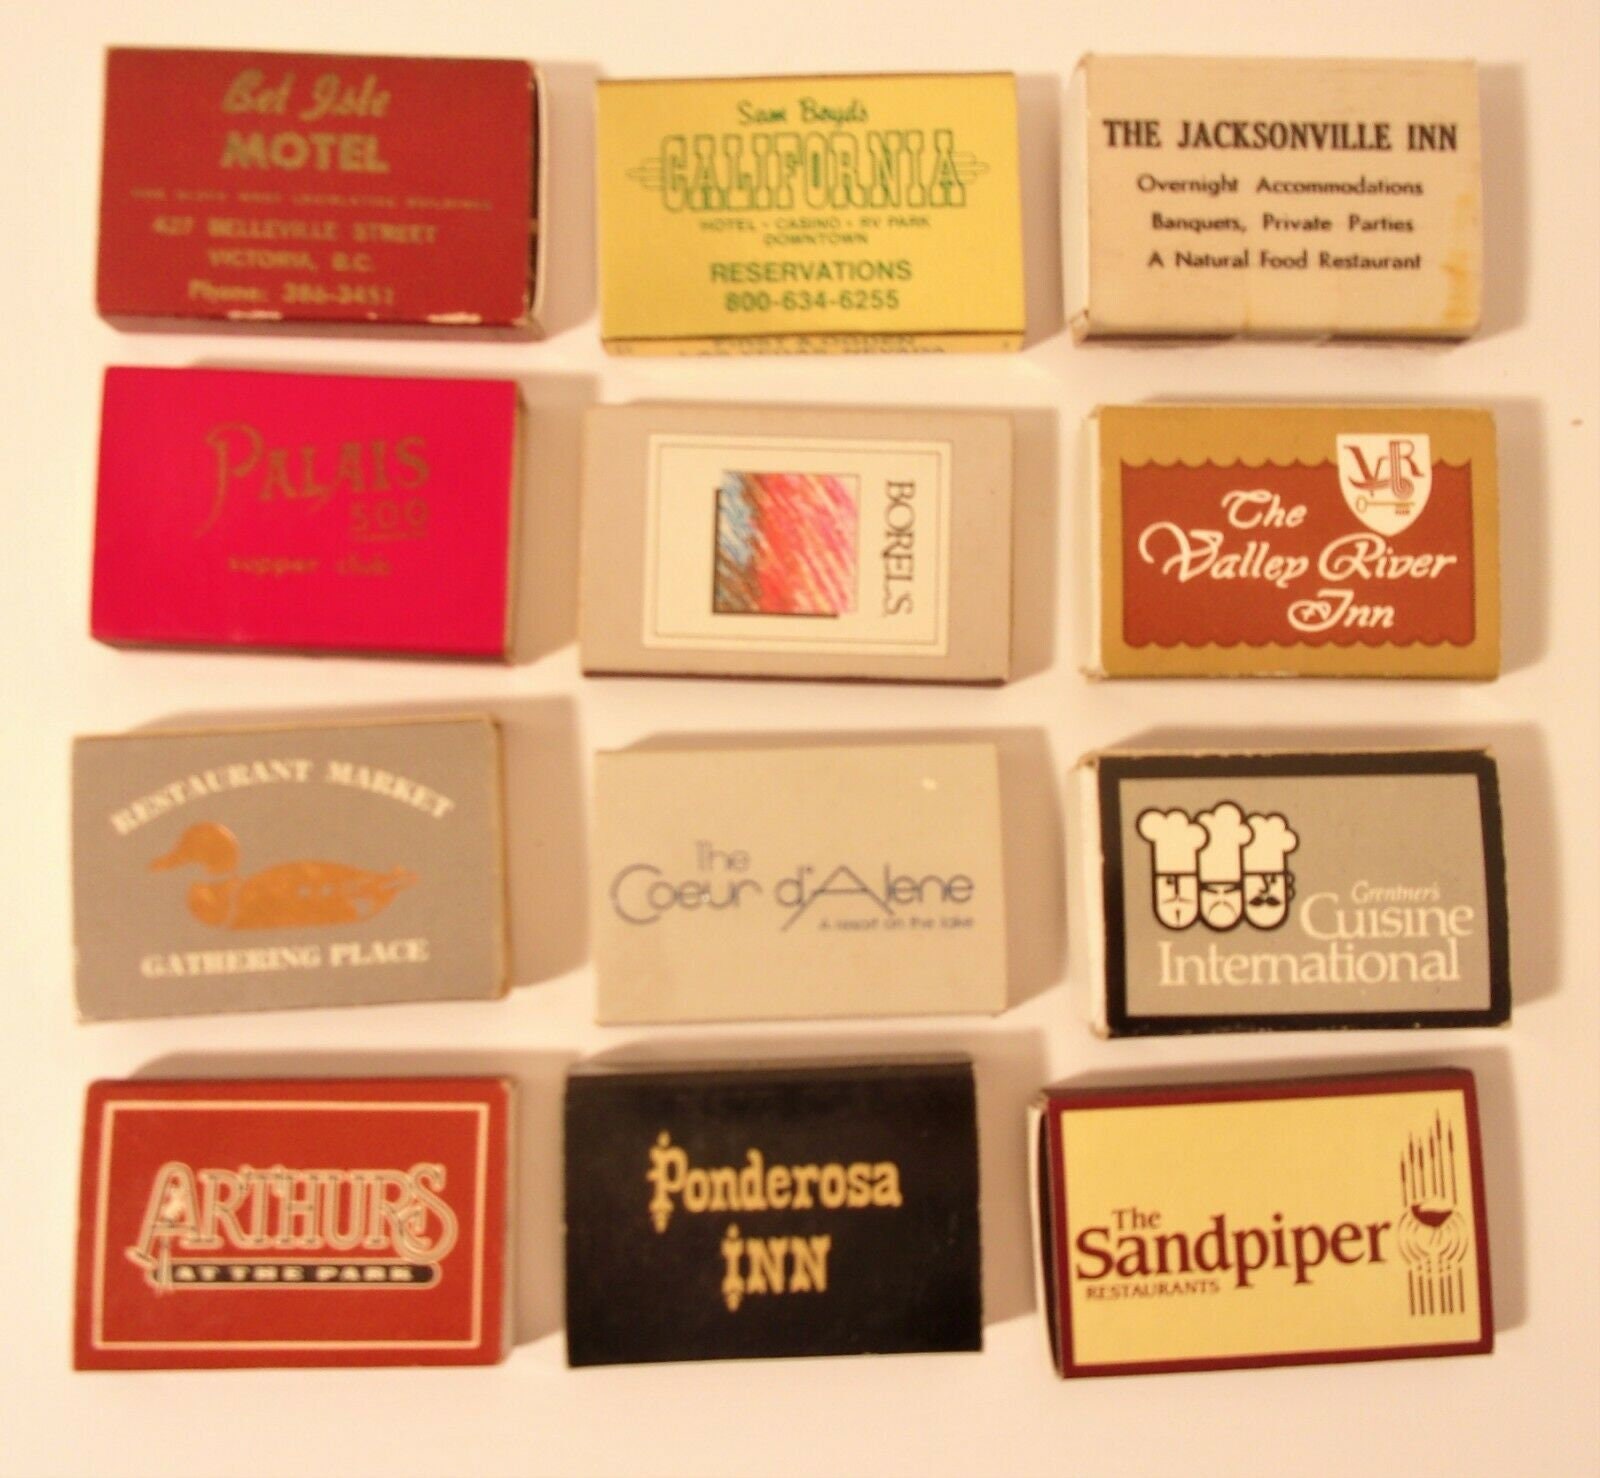 4 Vintage Hertz Matchboxes With Wood Matches / Vintage Matches 